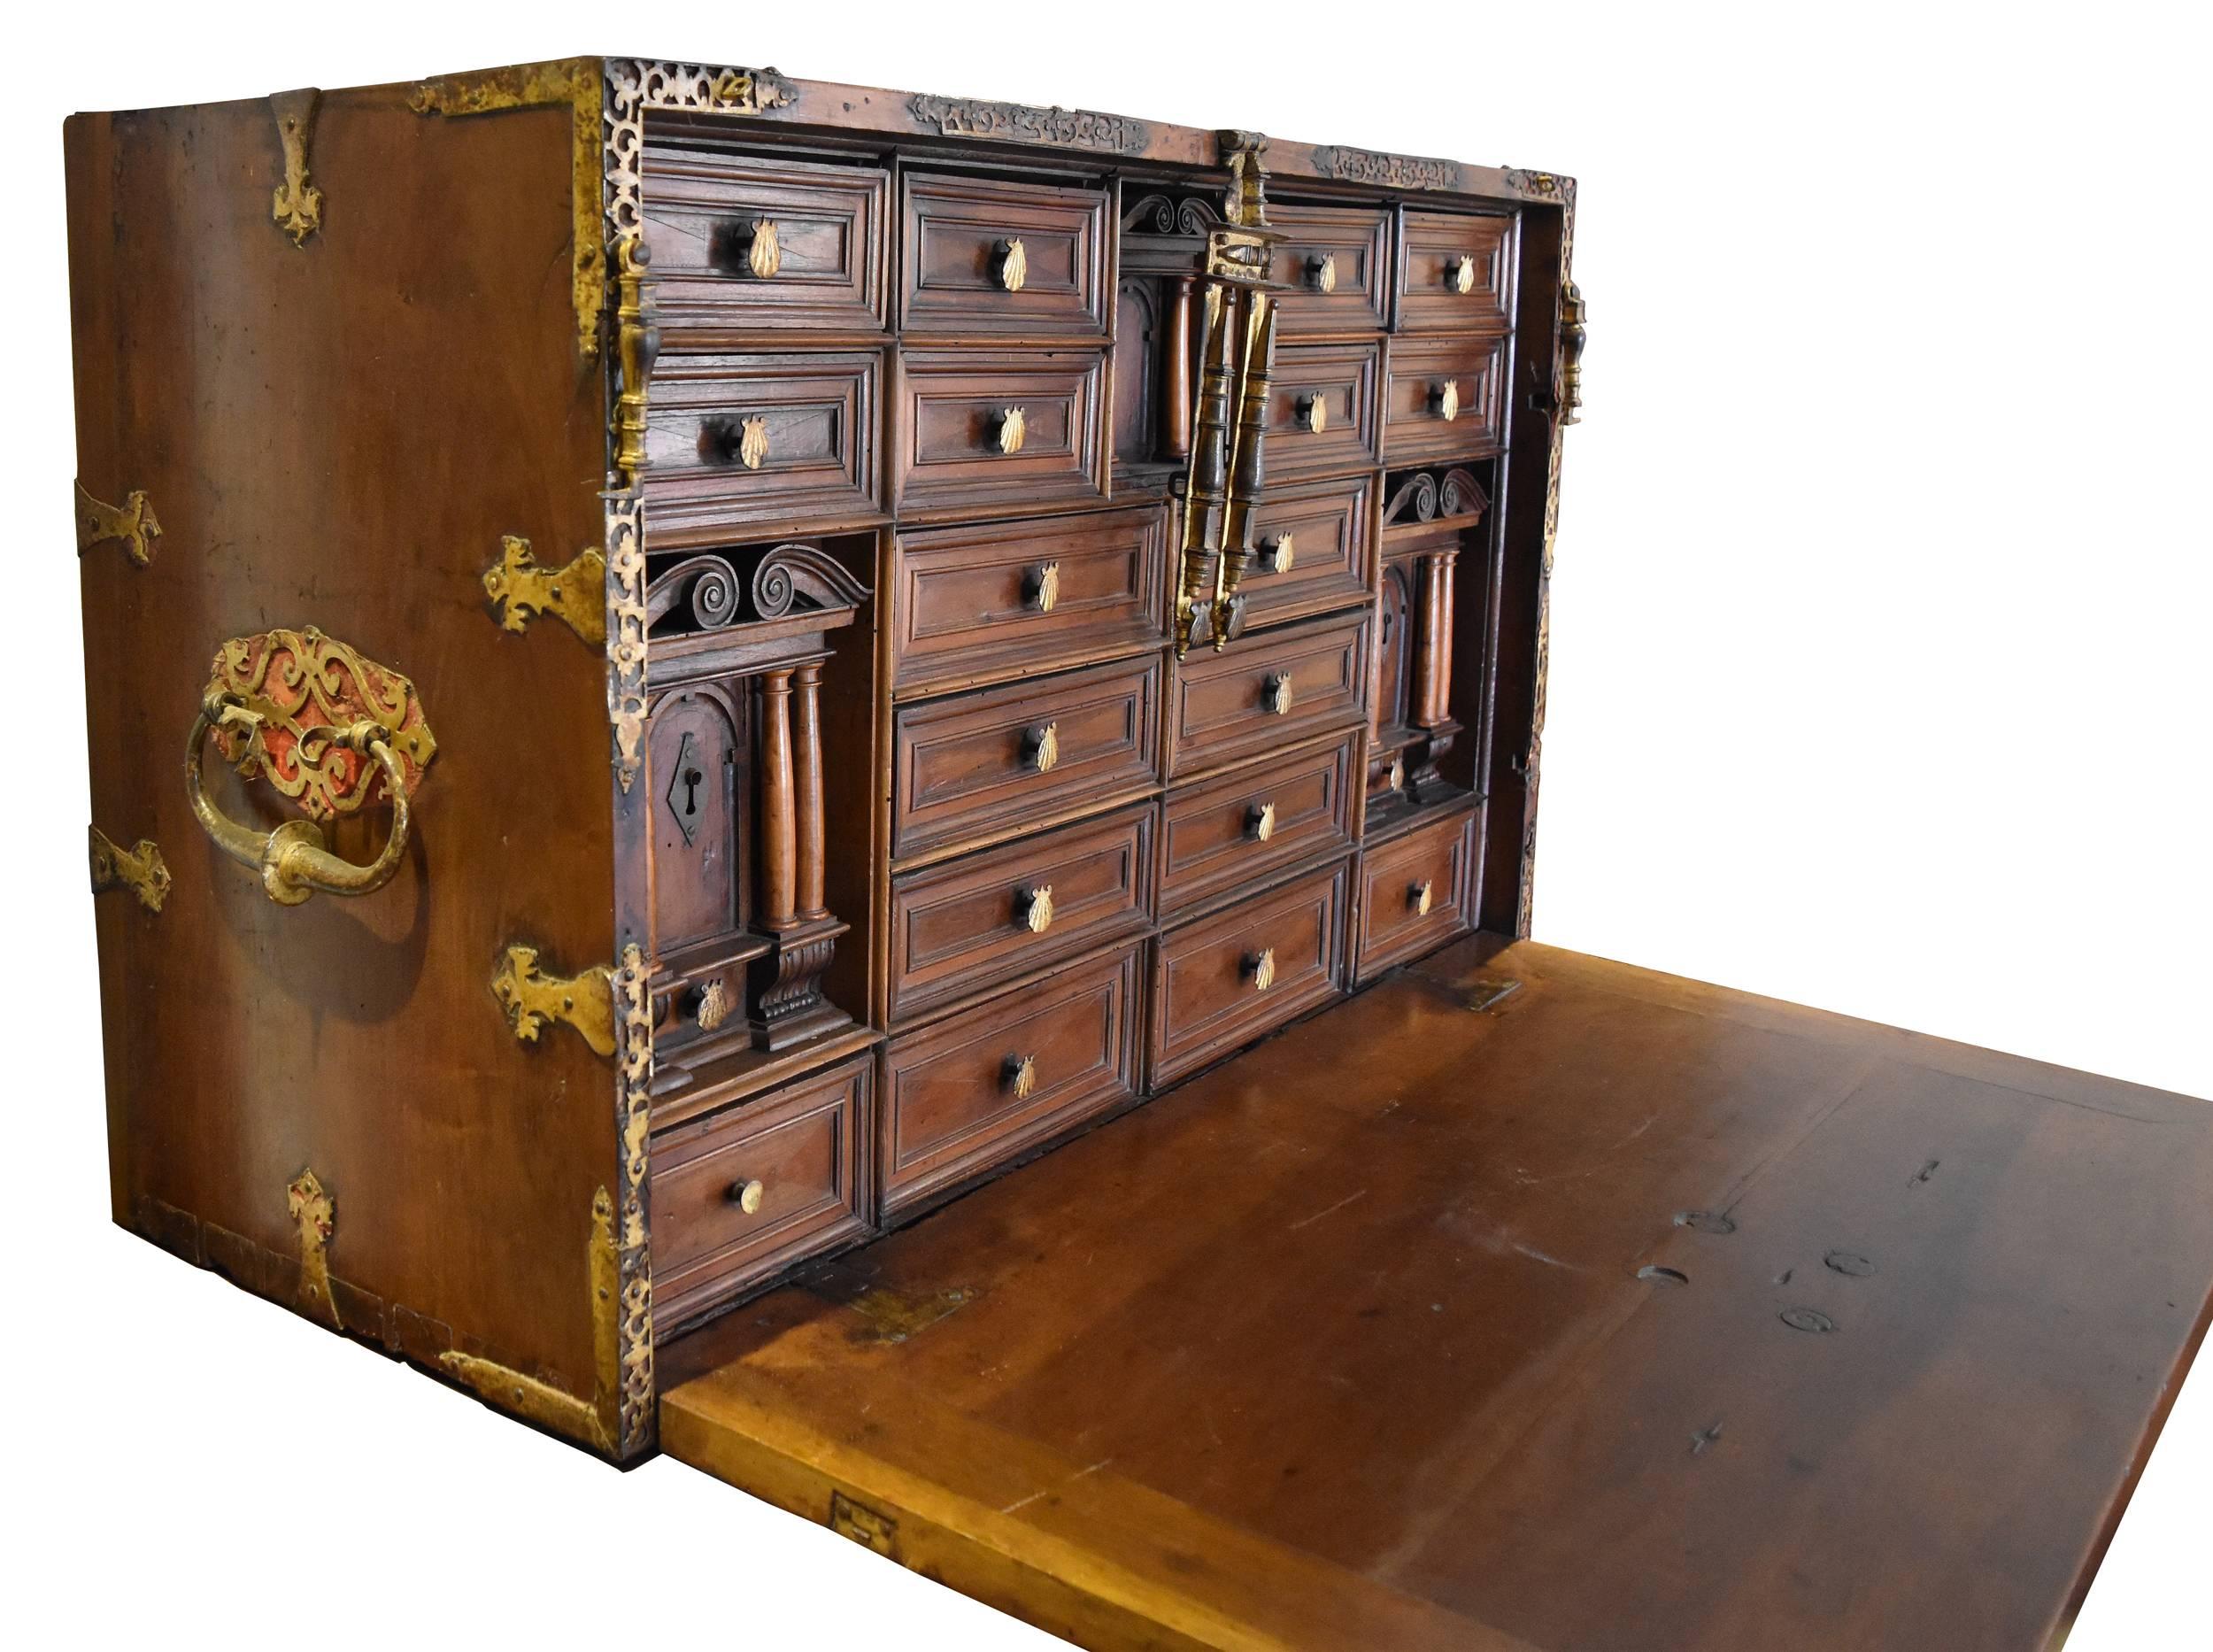 Original old gold iron handles and decorations covering exquisite velvet period cloth. Decorative columns in lemongrass wood. Designed for travelling, it opens into a writing desk and has four secret drawers. In pristine condition, it has not been